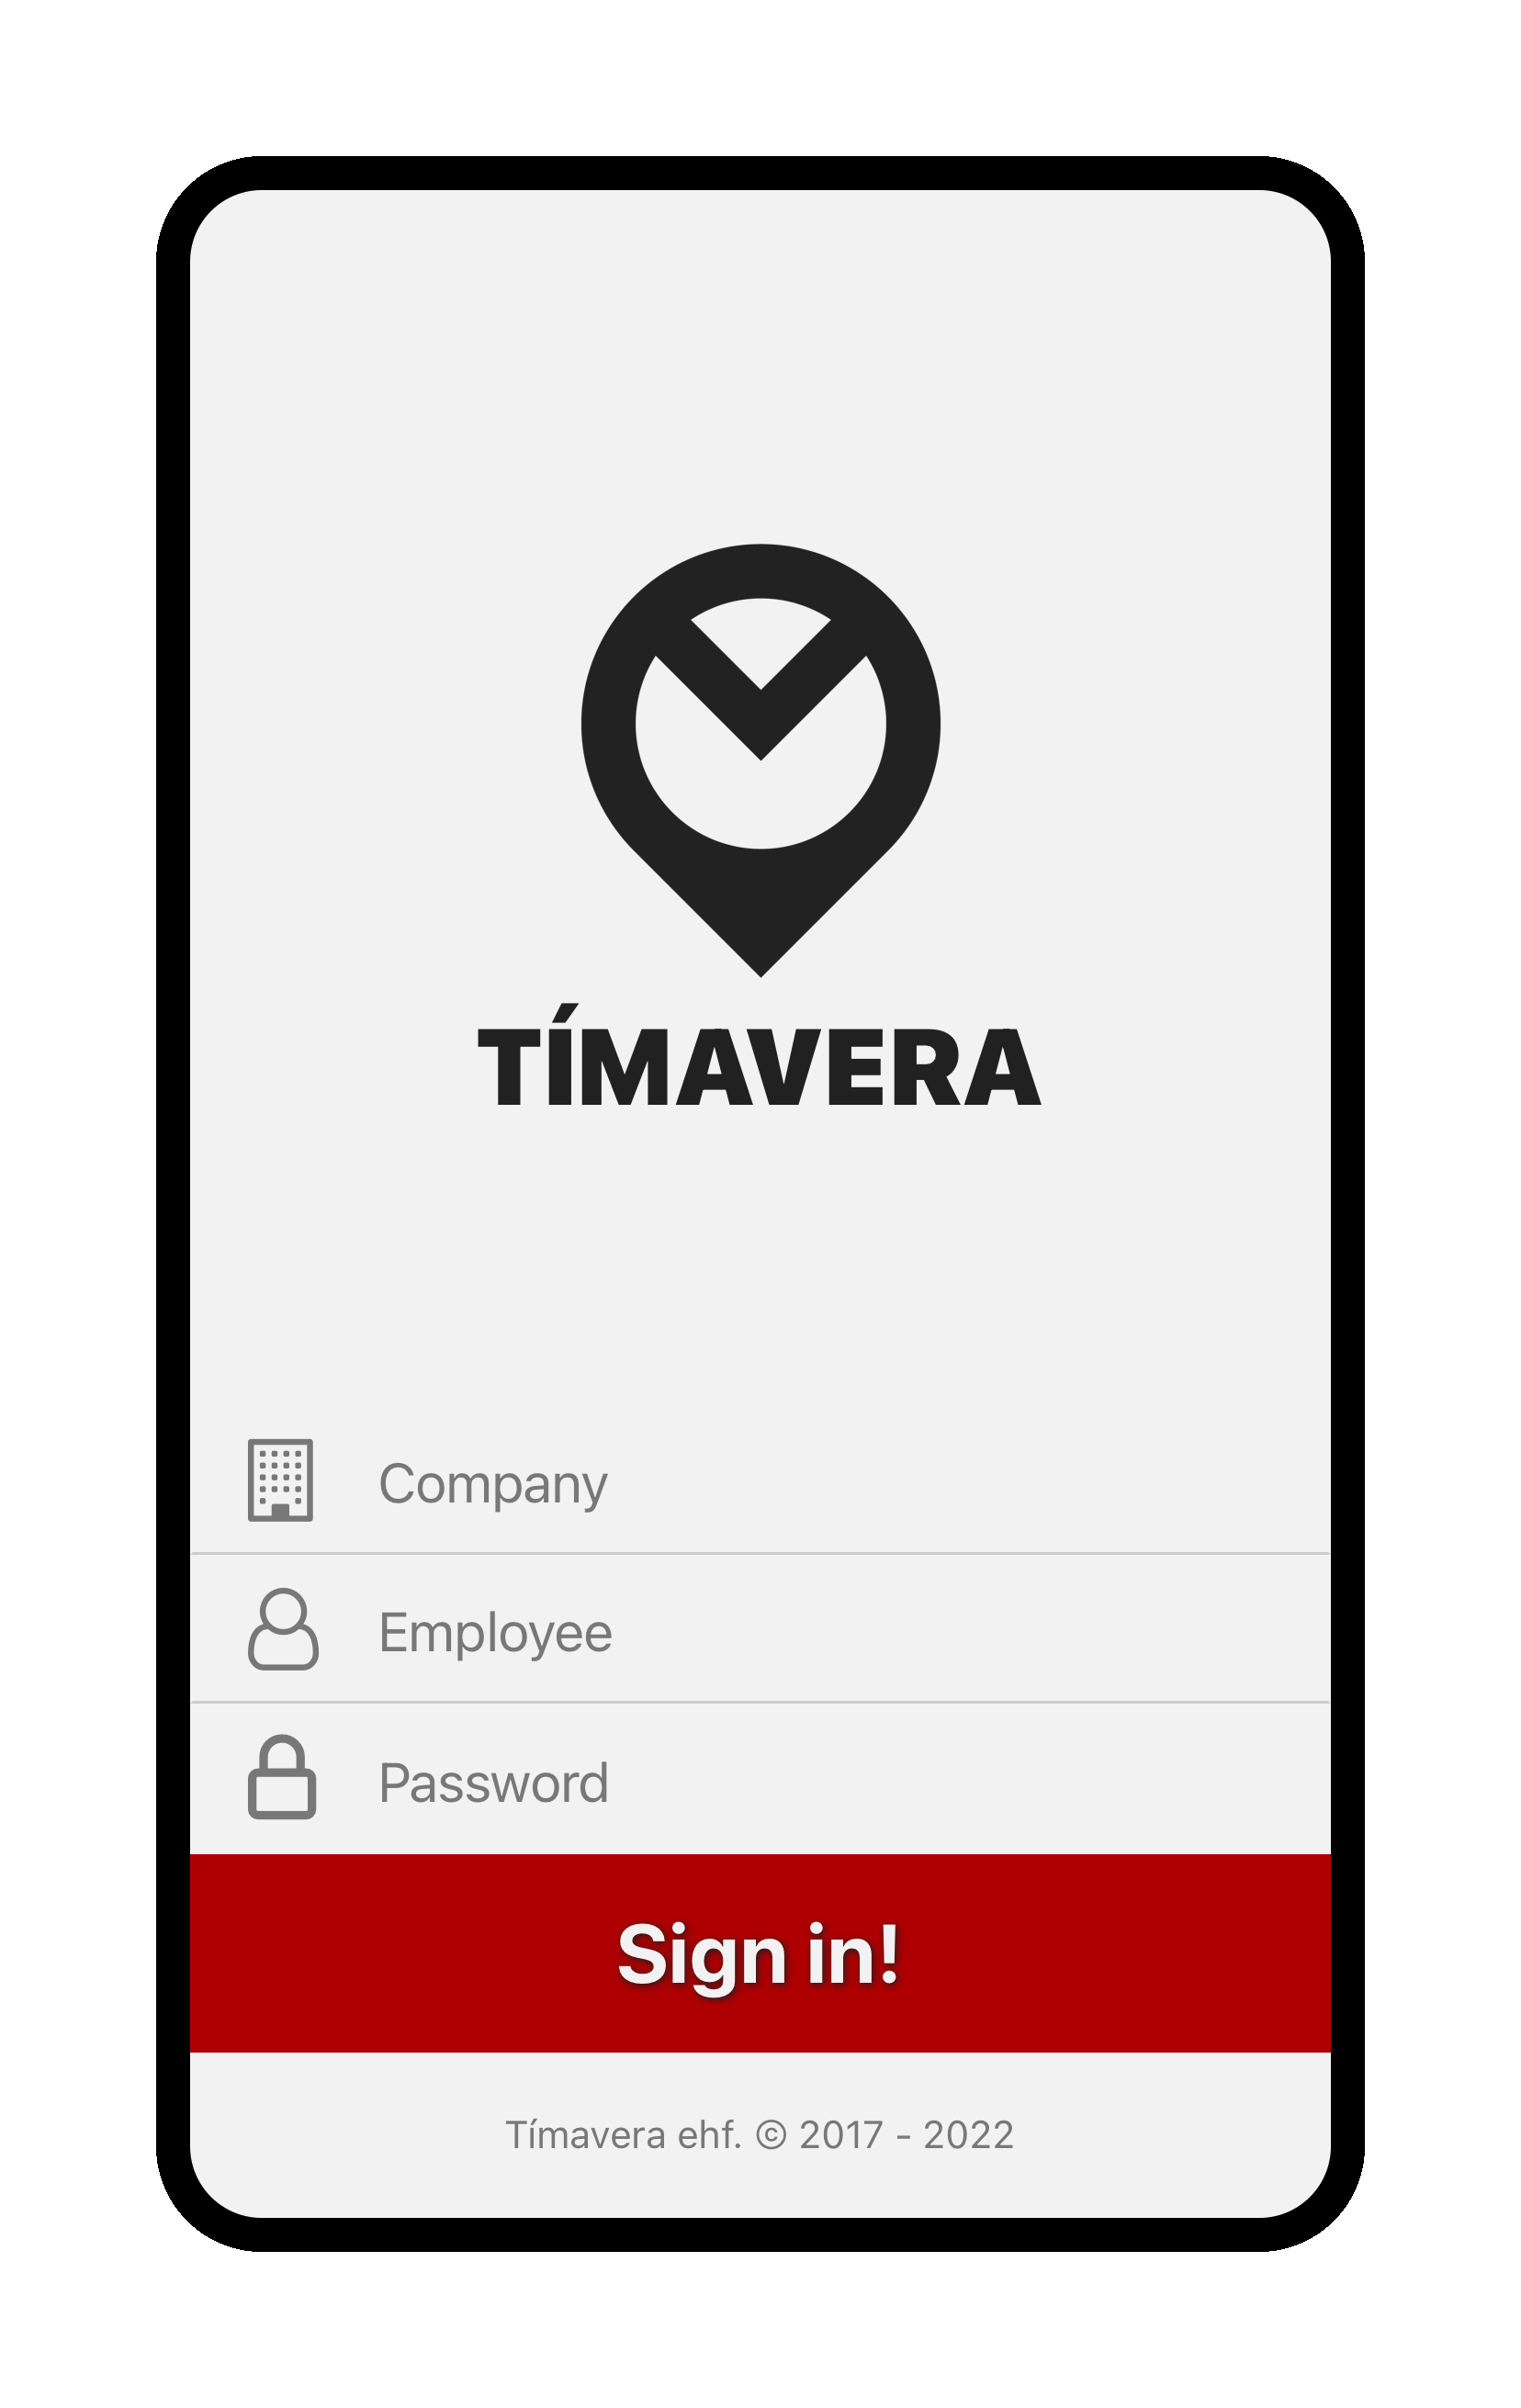 Screenshot of the login screen in the Tímavera app. Inputs for company name, employee username and password. Red sign in button.